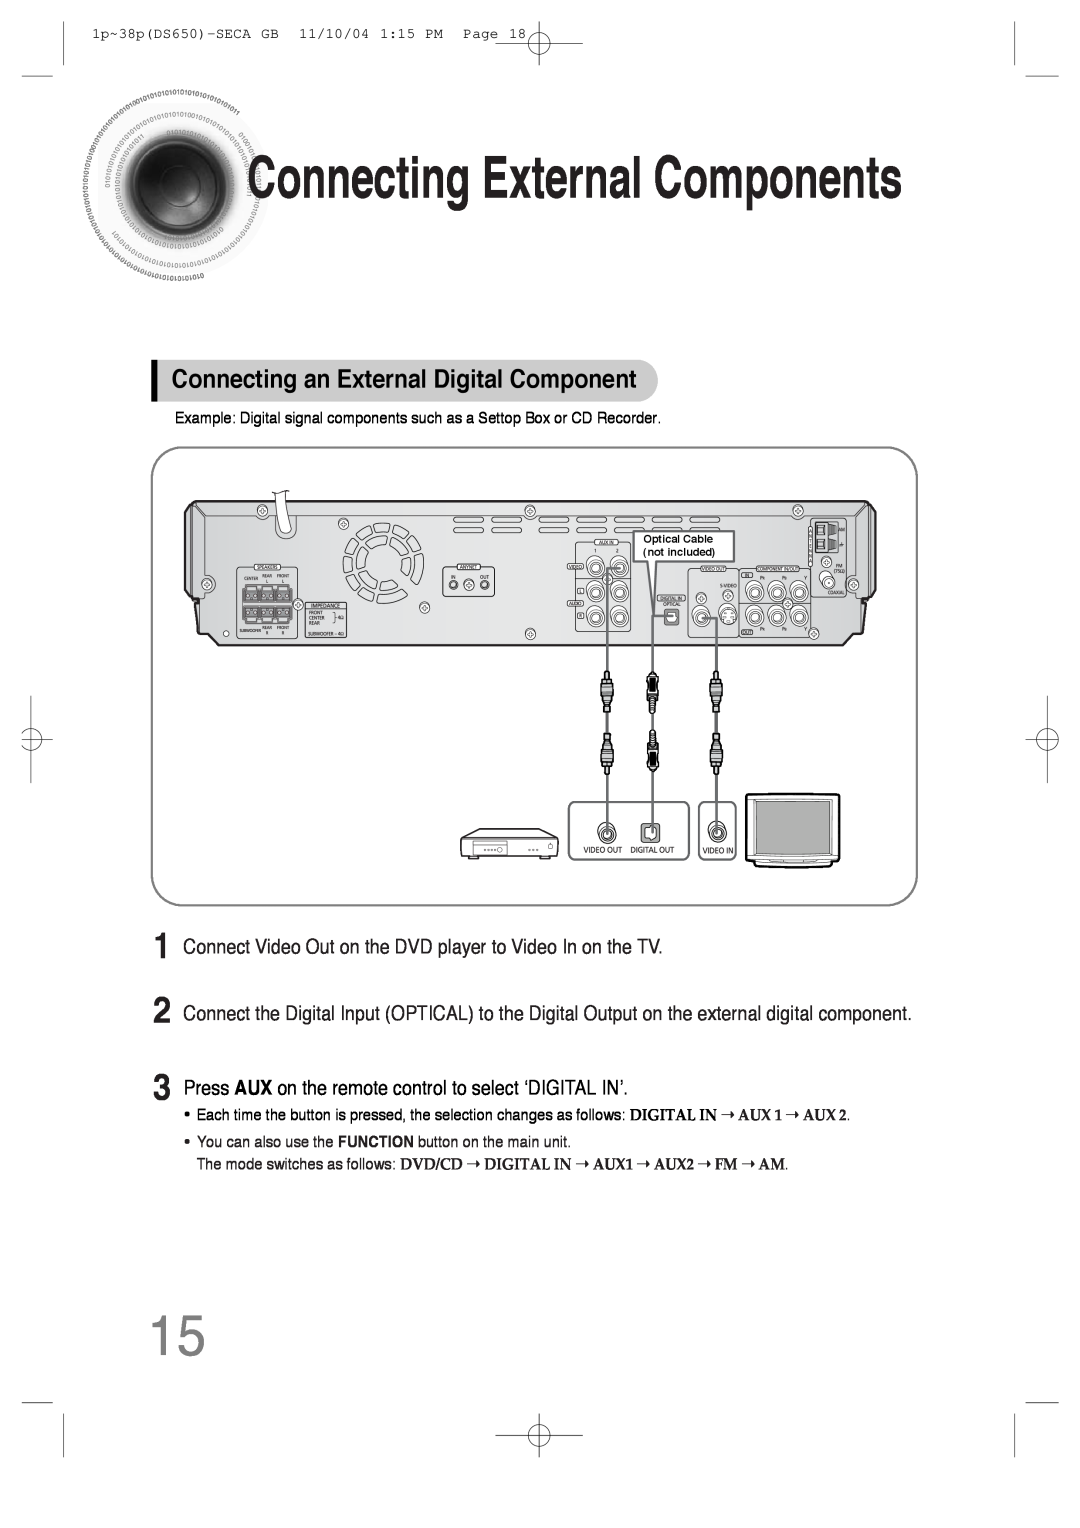 Samsung HT-DS650 instruction manual Connecting an External Digital Component, ConnectingExternal Components 